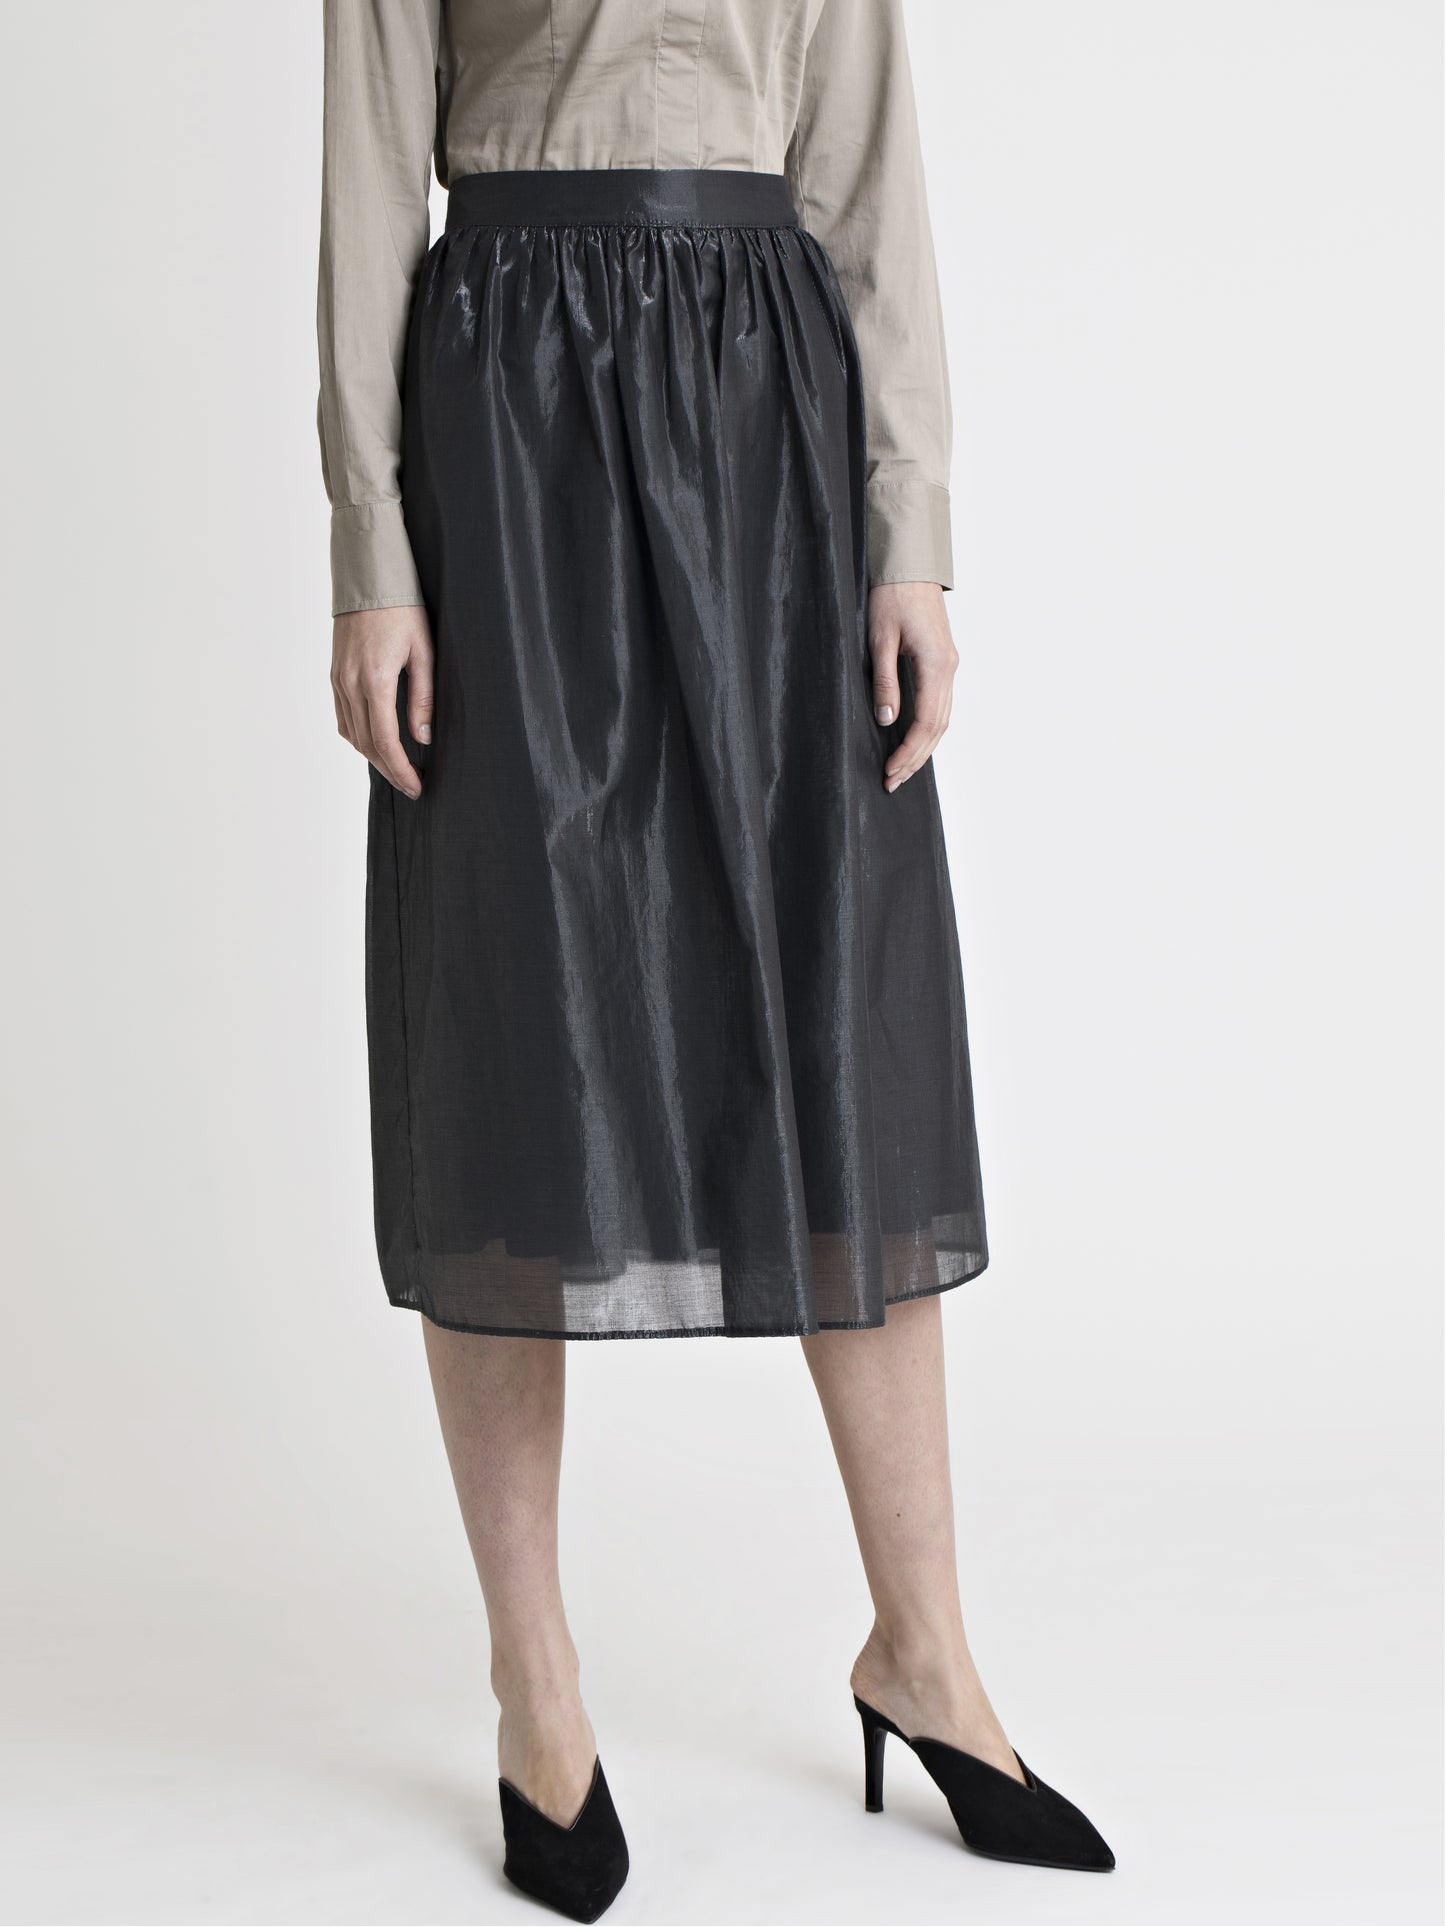 Lower body front view of a female model wearing a sand color dress shirt, black high heel slip on shoes, and a below the knee glossy black gathered skirt, from the RÉZO women's collection.